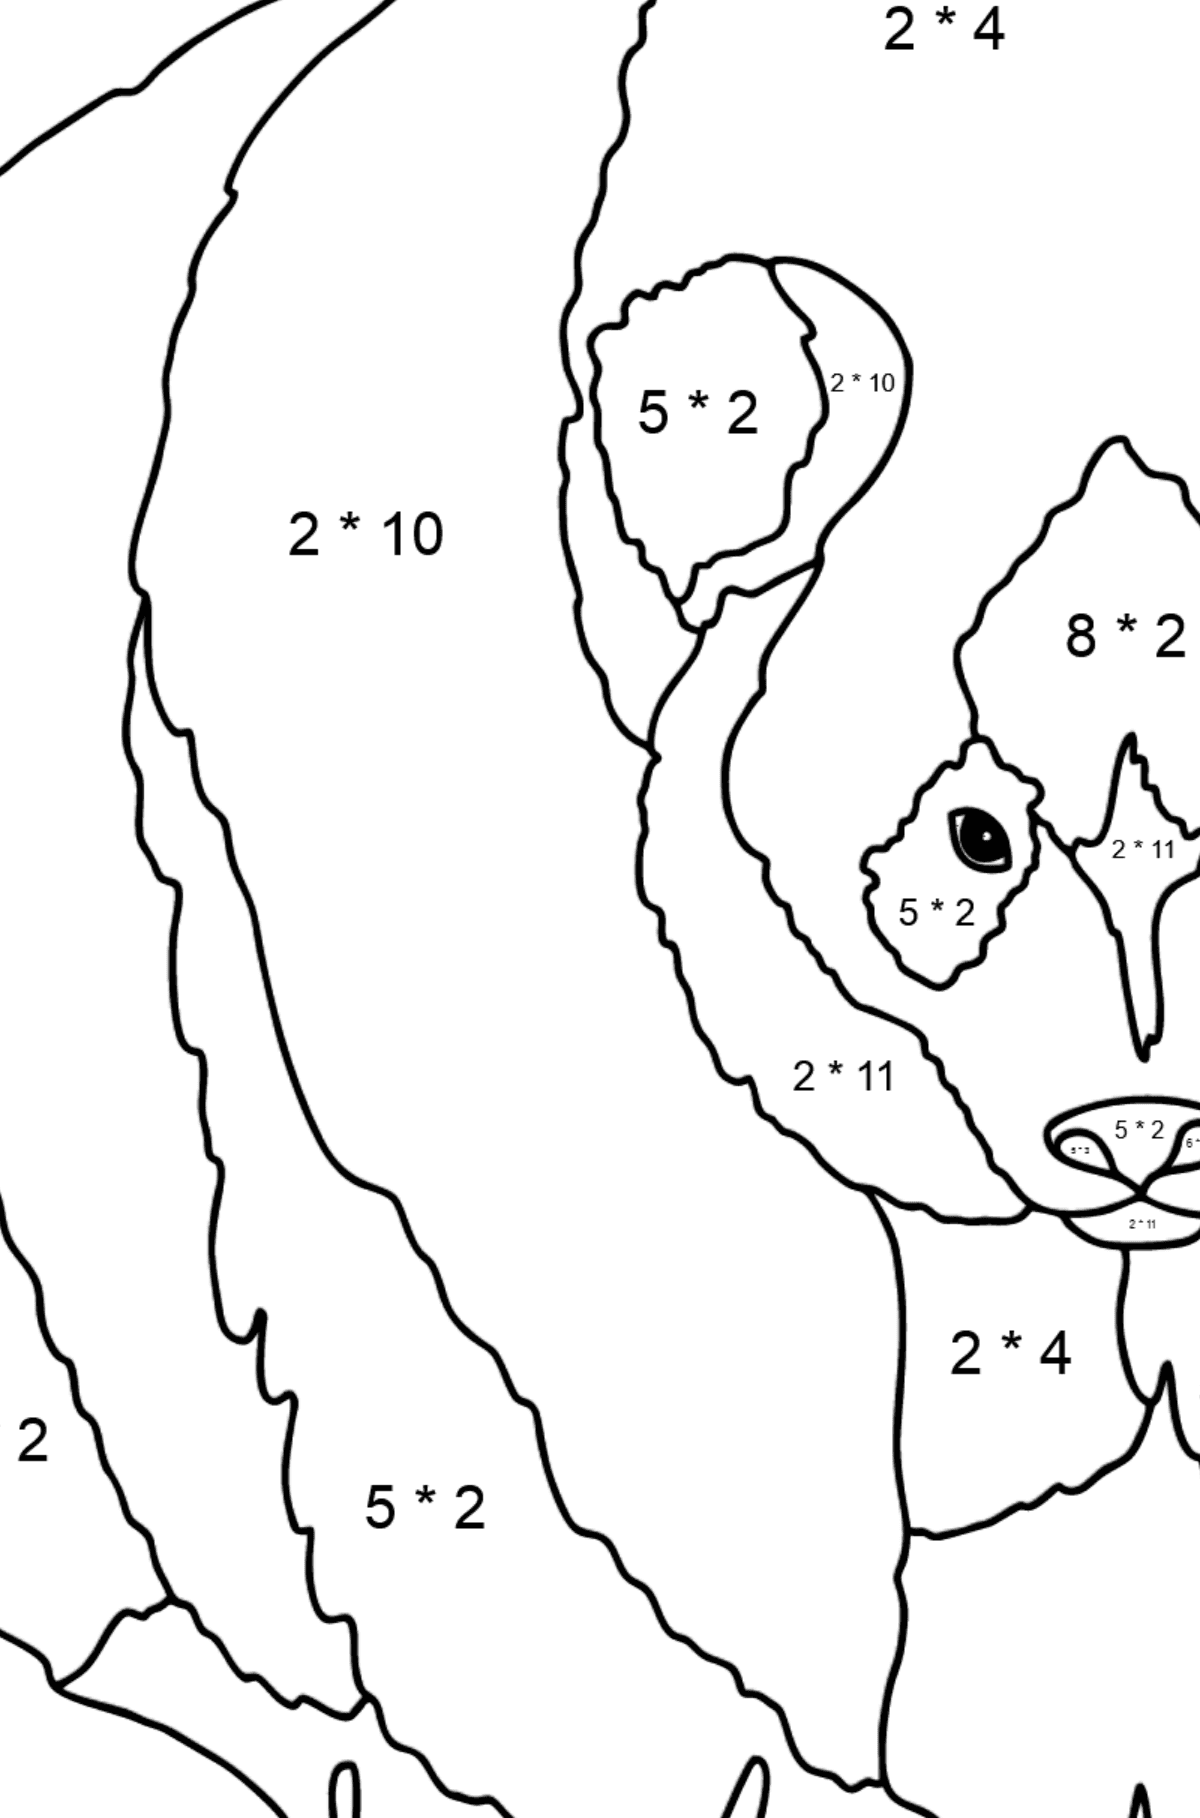 Coloring Page - A Panda is on a Hunt - Math Coloring - Multiplication for Kids